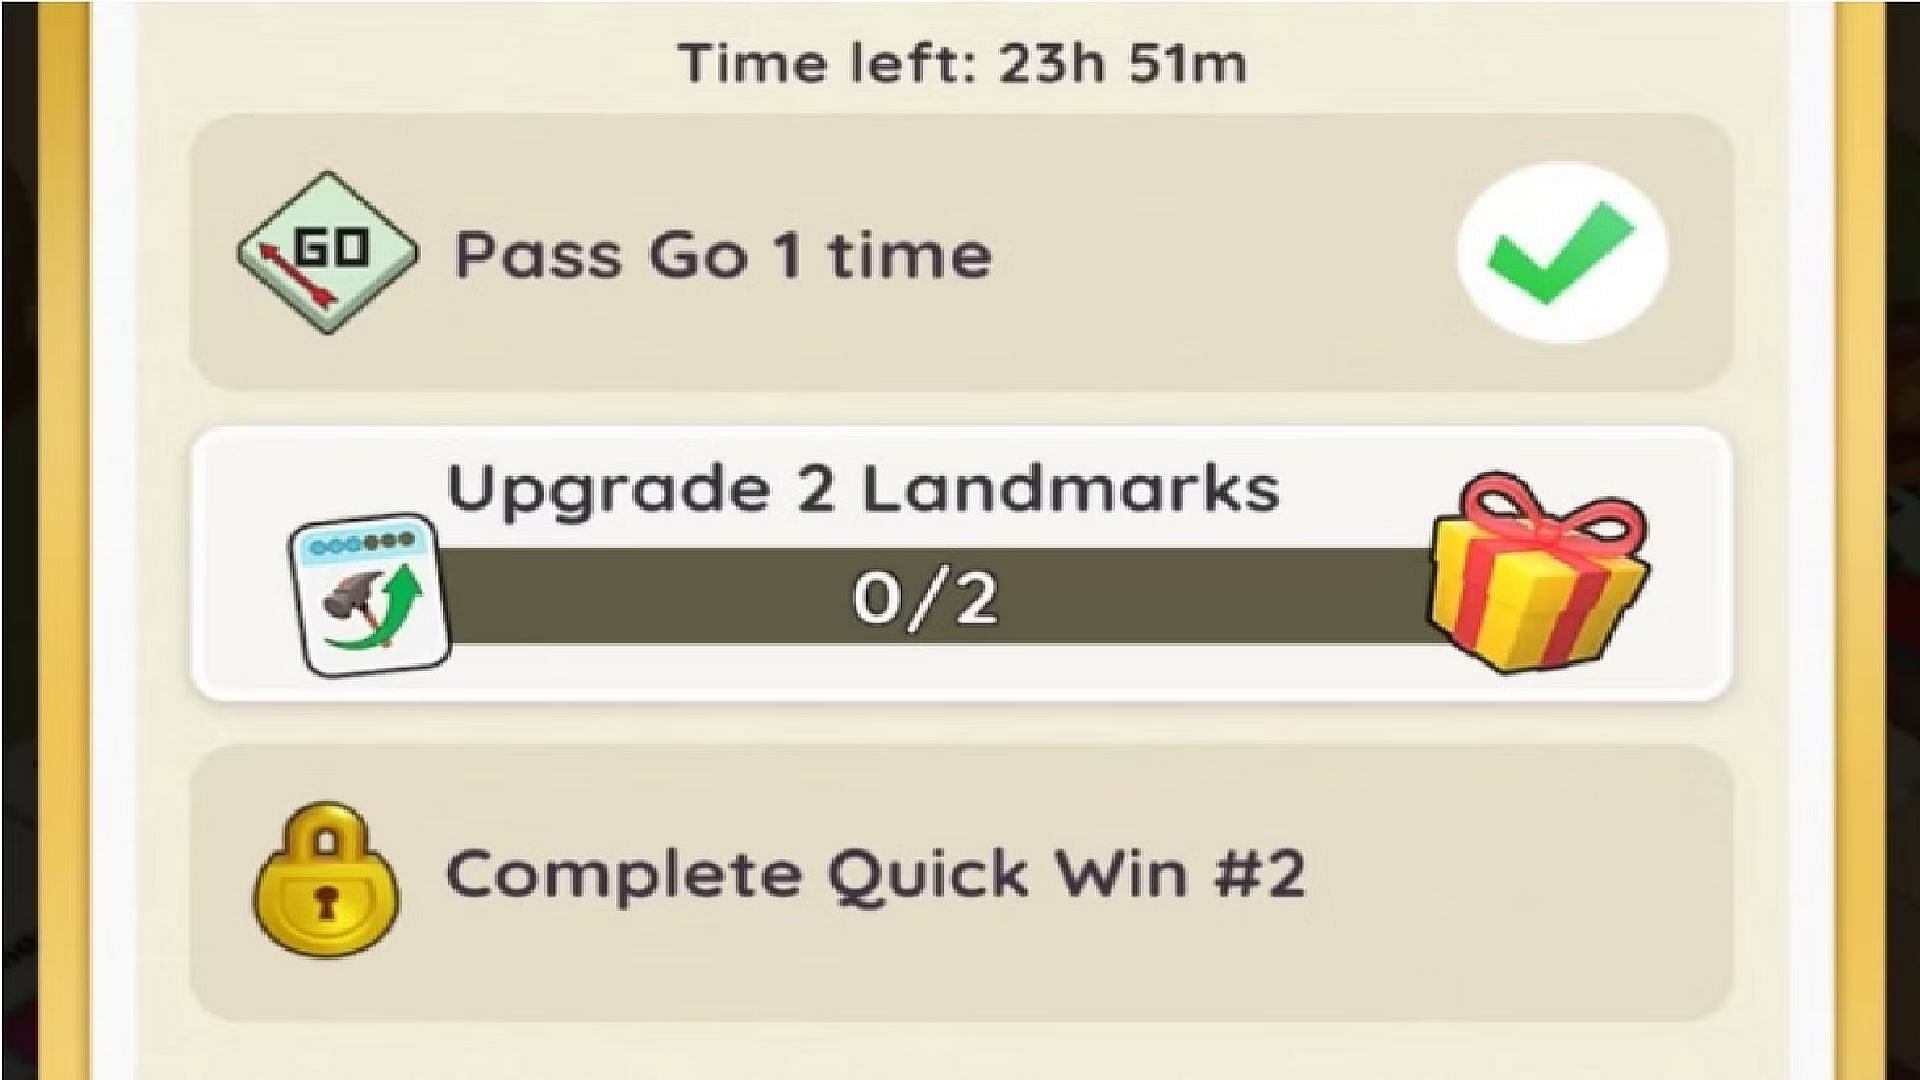 Complete Quick Wins to earn more Piackaxe tokens for free in Monopoly Go (Image via Scopely)